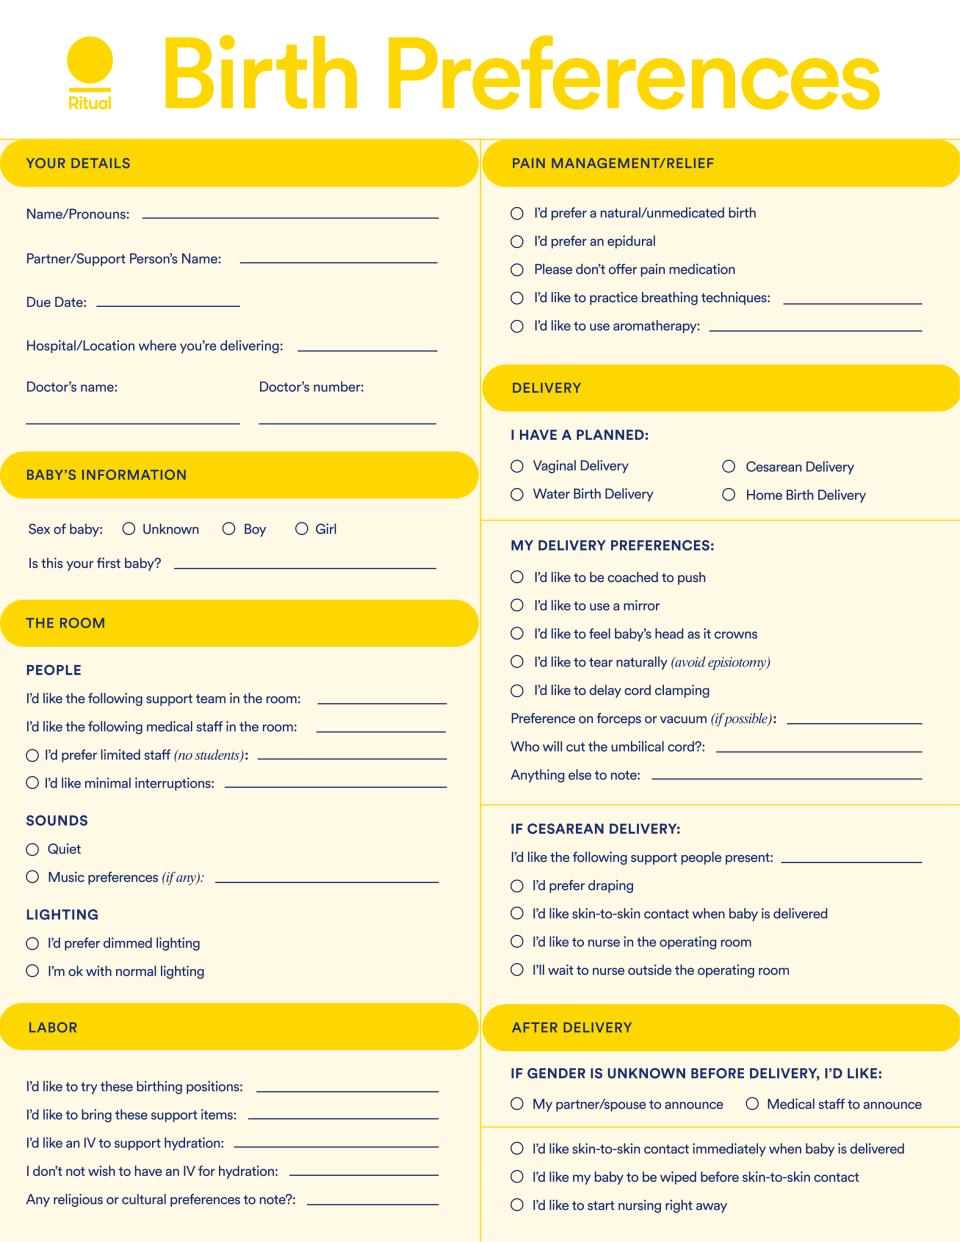 Ritual Birth Plan Template to fill out for expecting mothers and parents.